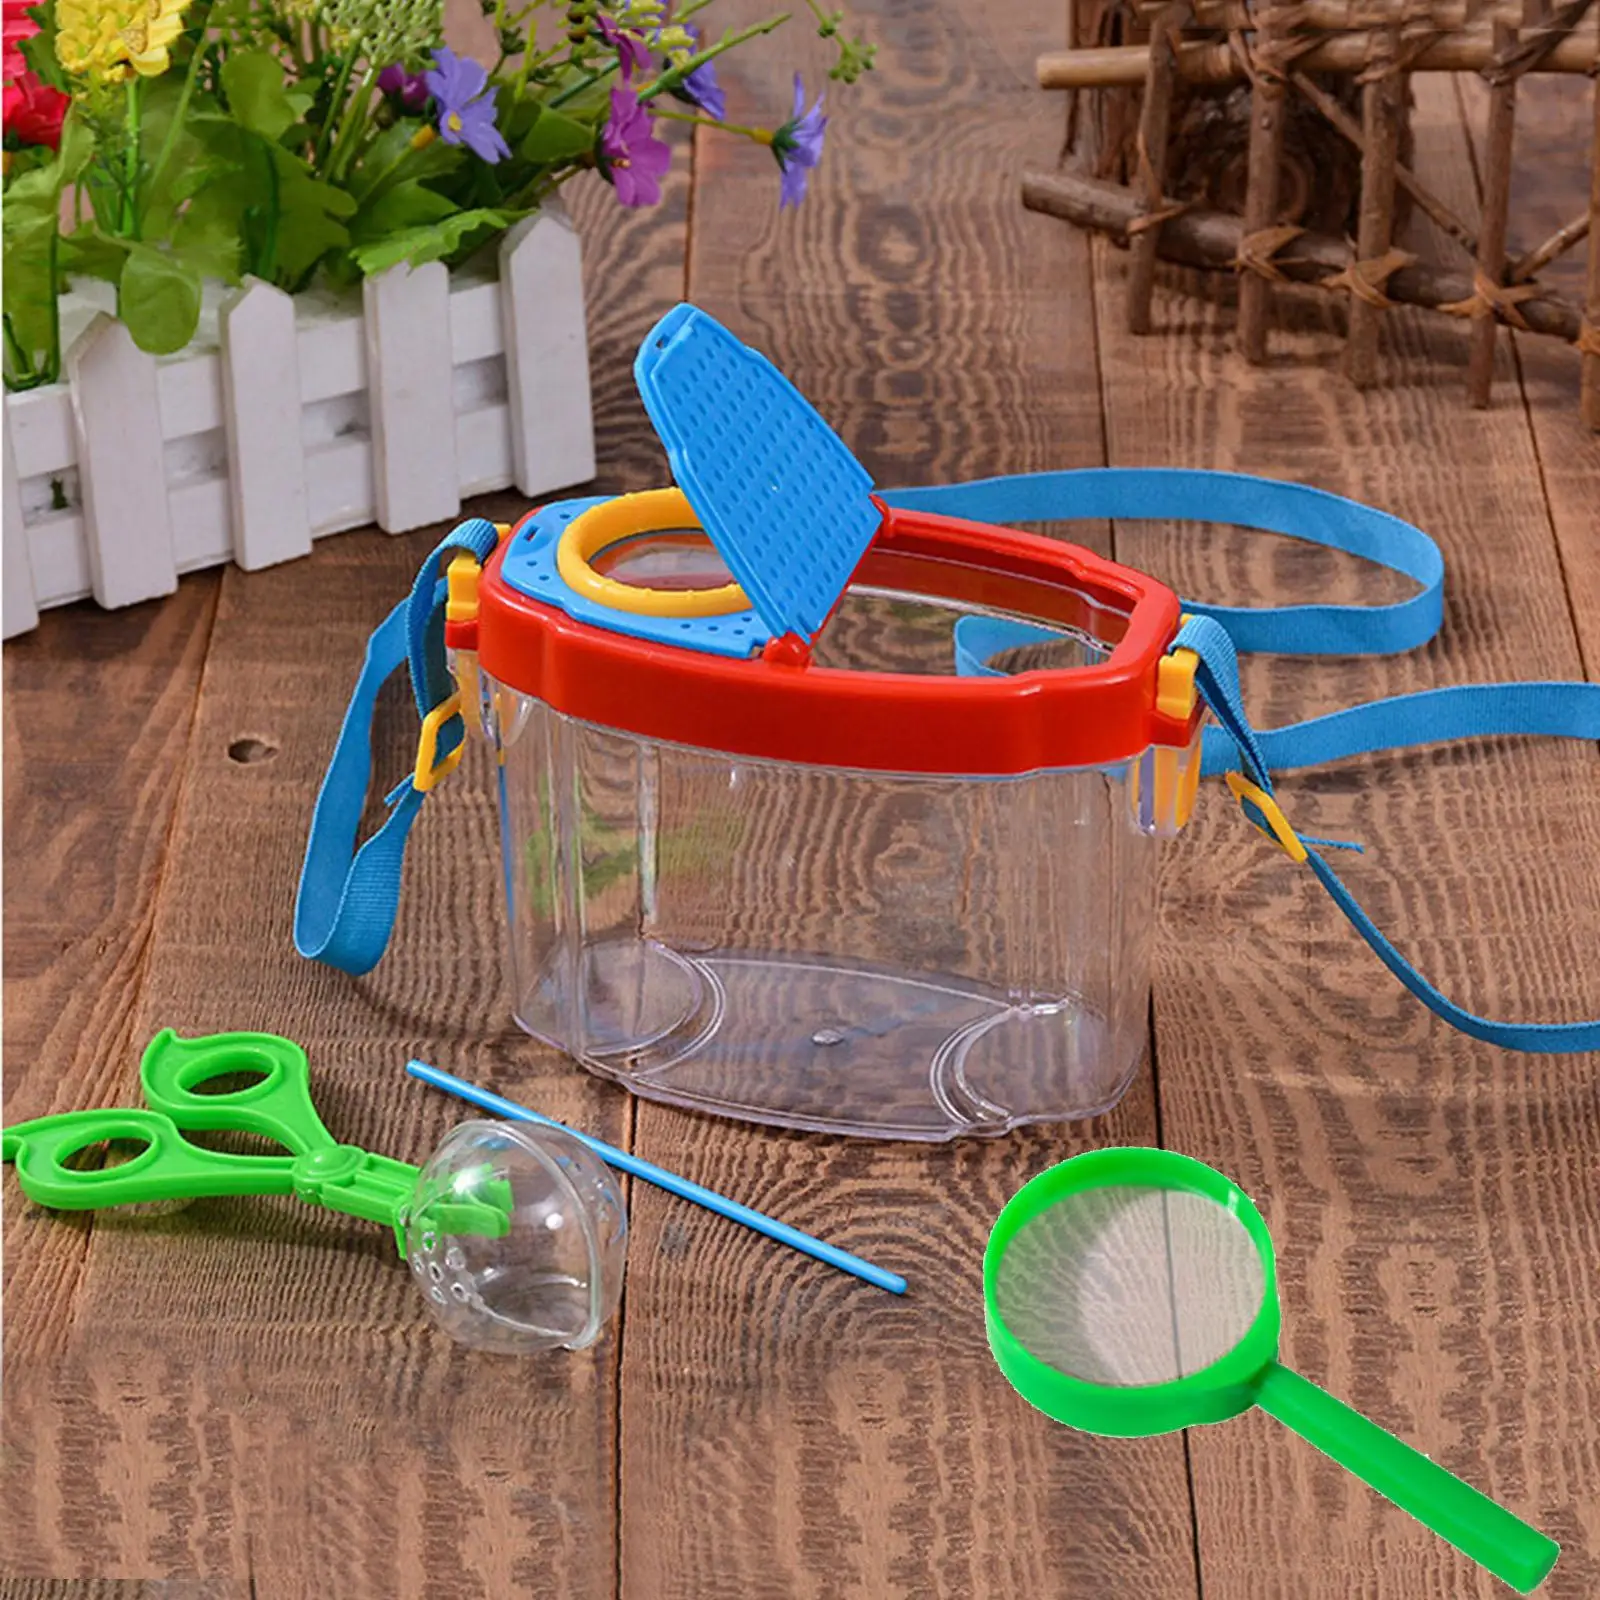 Insert Bug Viewer Magnifier Science Educational Toy, Kids Outdoor Explorer